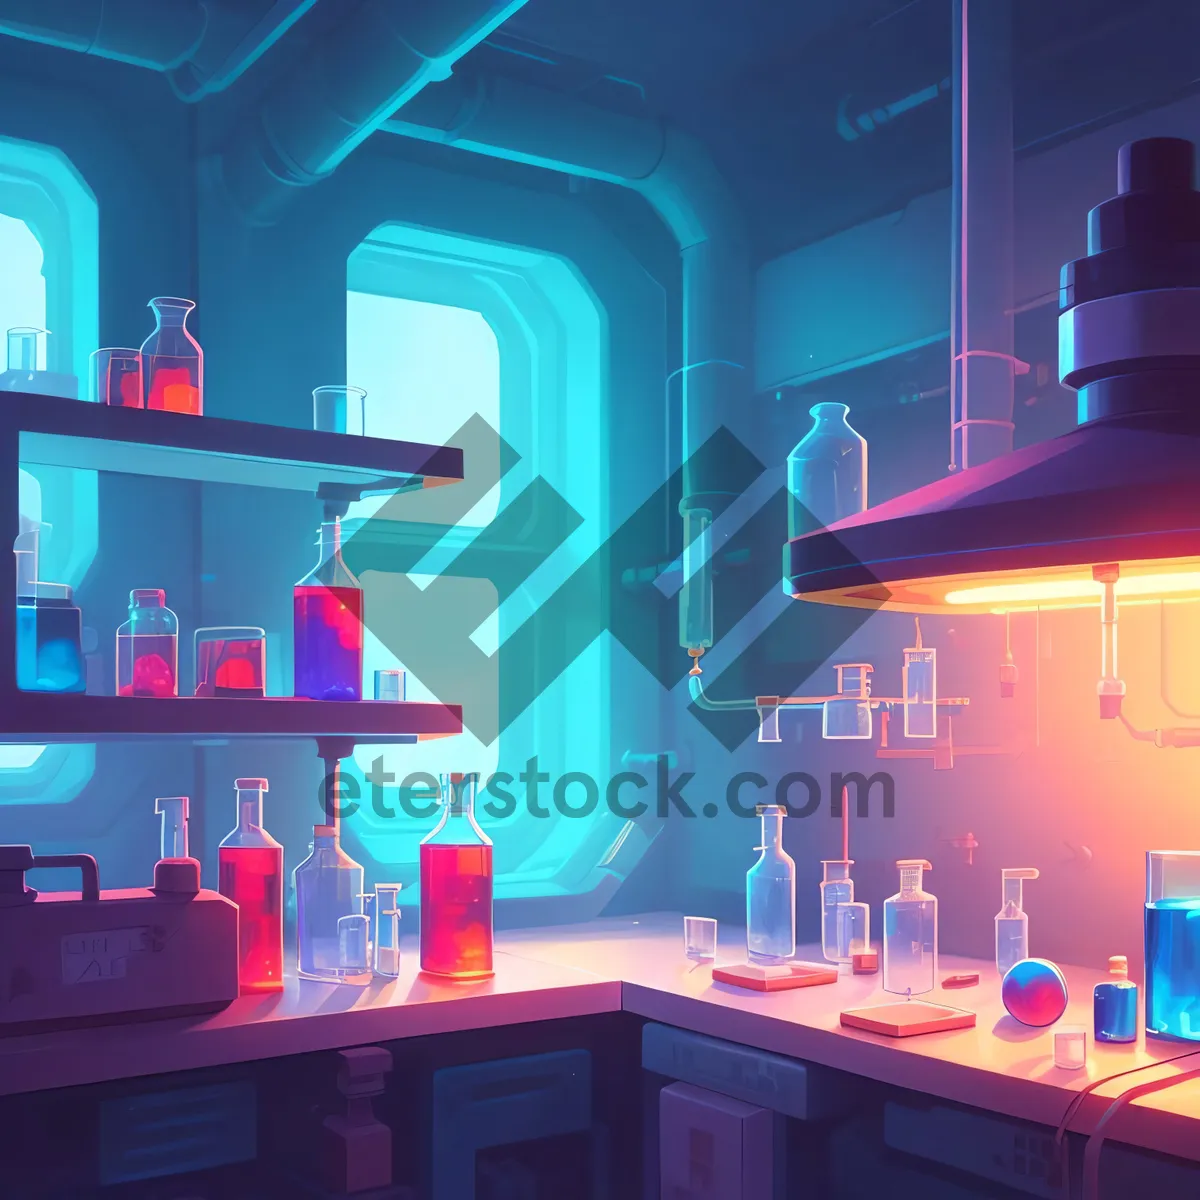 Picture of Digital Nightlife: 3D Barroom Counter with Vibrant Light Effects